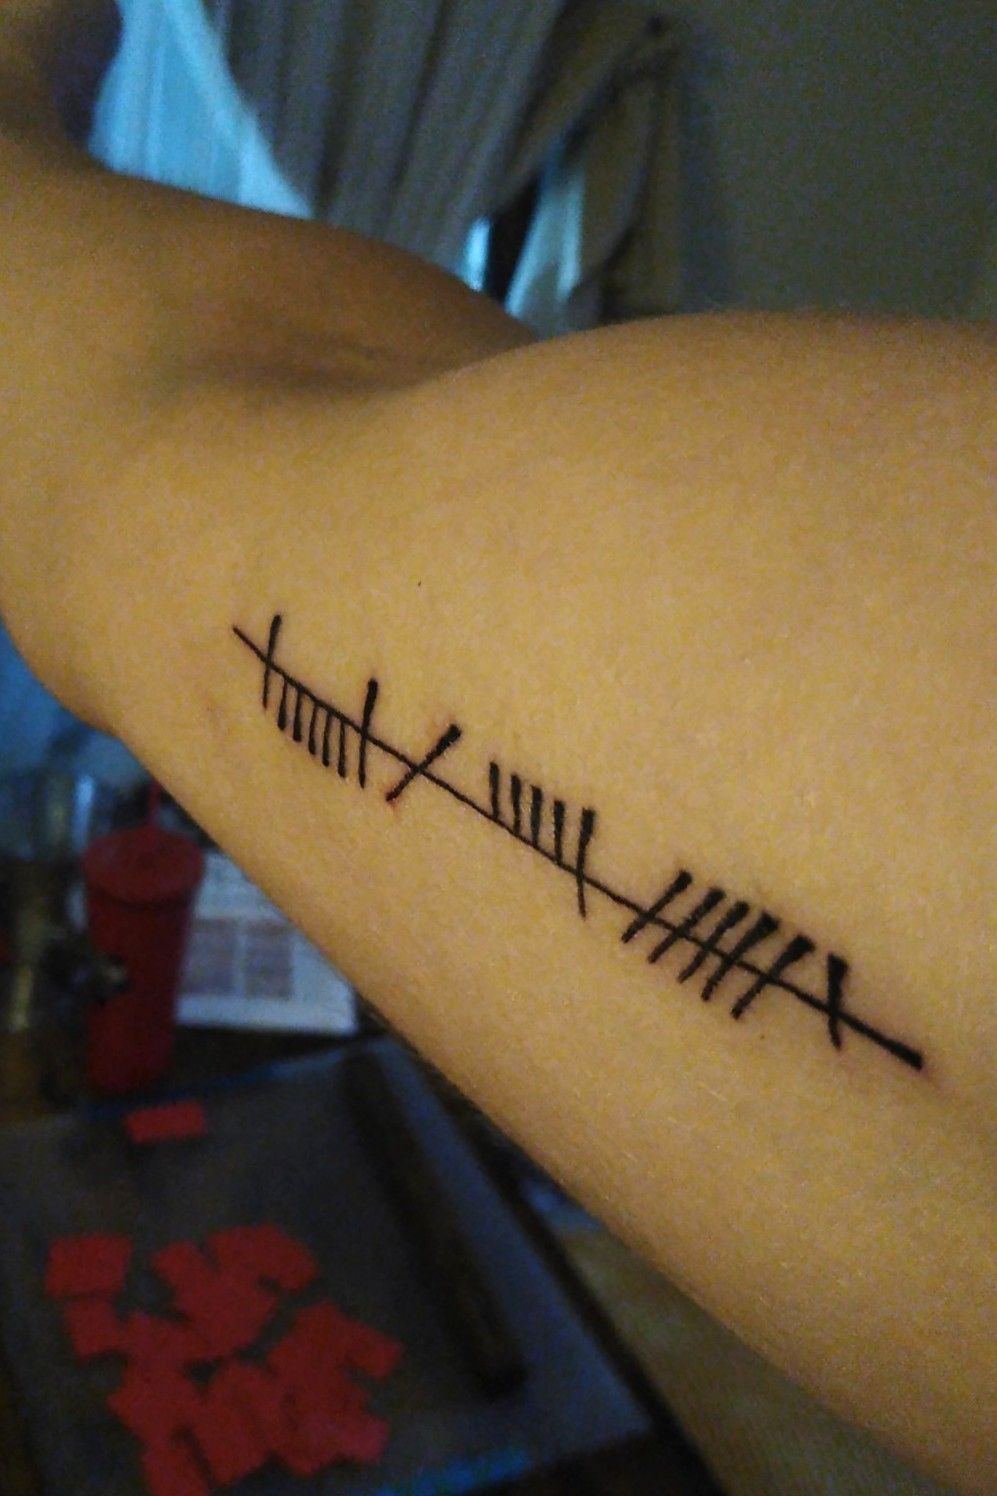 Ogham Art - It's a twofer #TattooTuesday from the Celtic Classic. This  gentleman met me here last year and commissioned these two Ogham tattoos.  Left-right they are Saoirse (Freedom) and Fírinne (Truth).